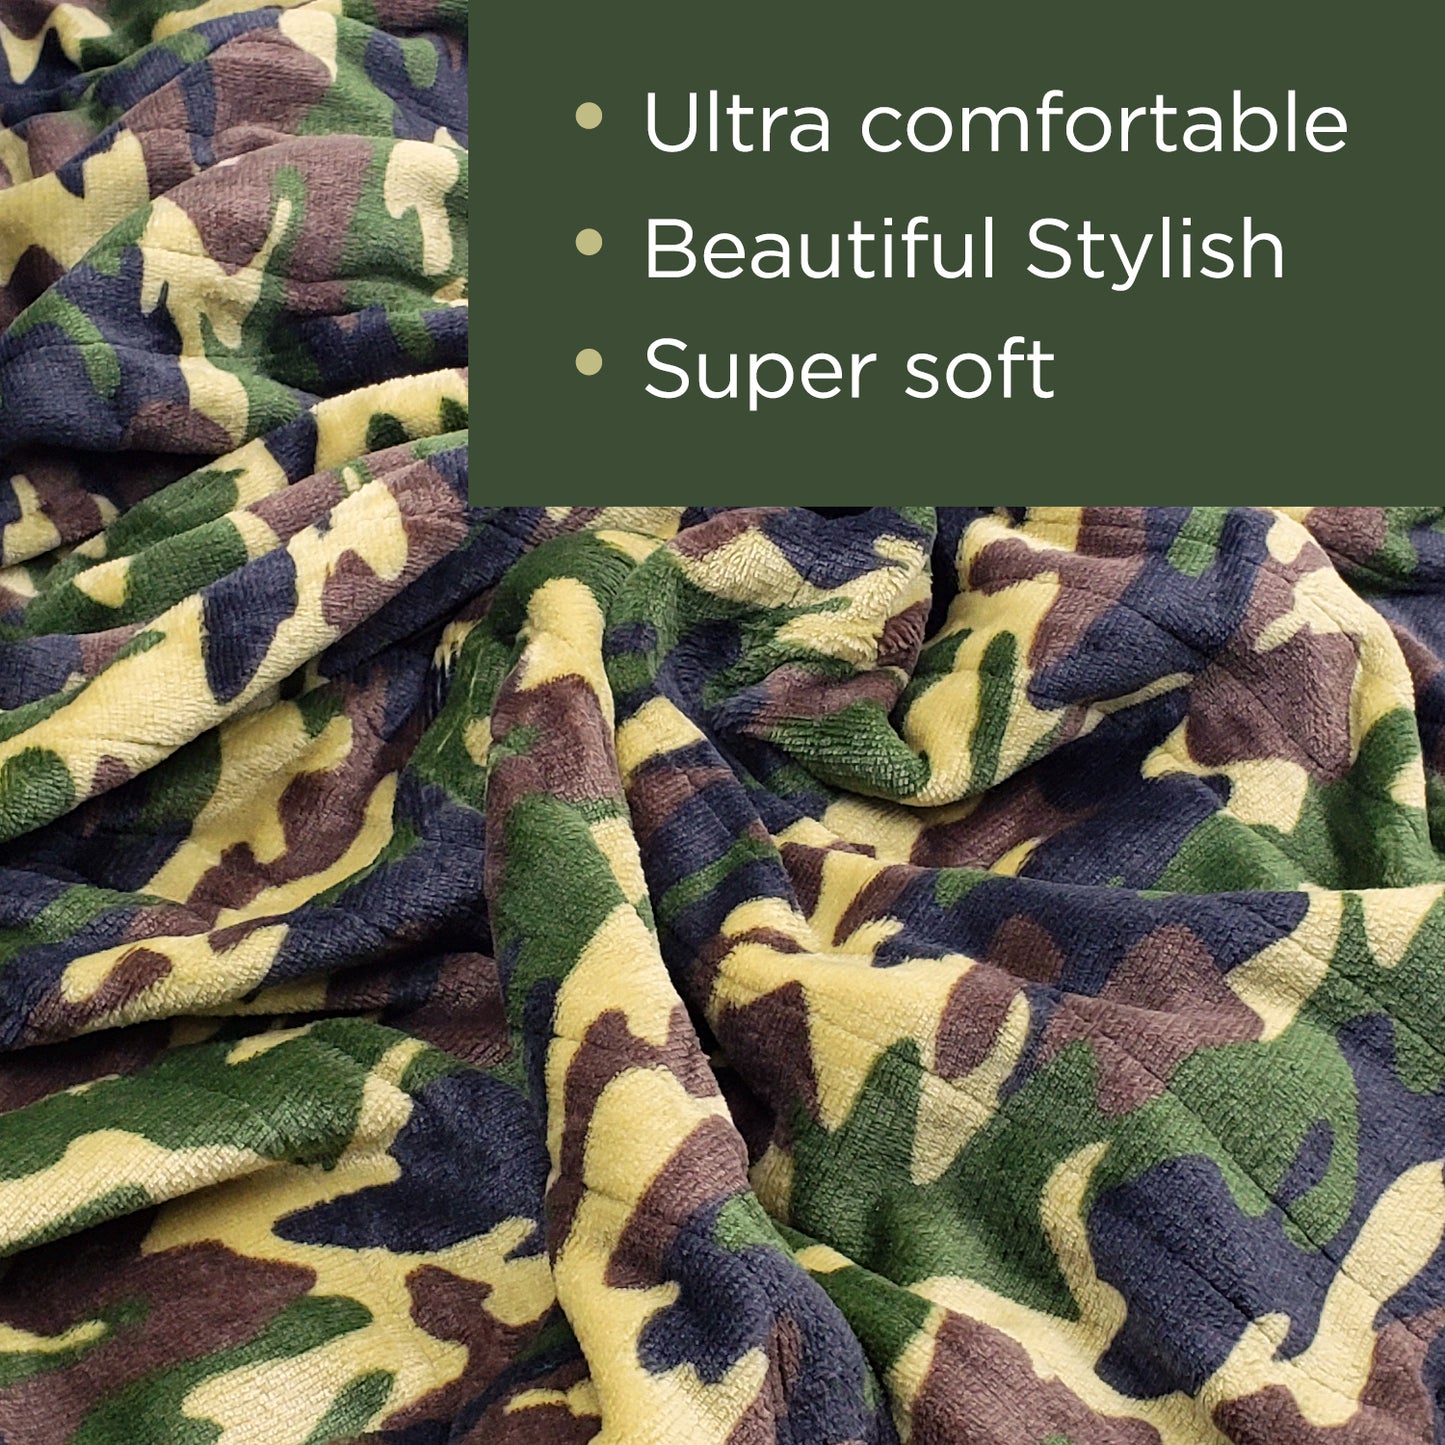 Dr Relief by SUNAID Electric Heated Throw Blanket Fleece with Controller, 4 Hours Auto Shut-Off, Fast Warming, Full-Body Comfort, Luxuriously Soft, Machine Washable, 50" x 60", Micromink for Cozy Couch or Bed (Camo)